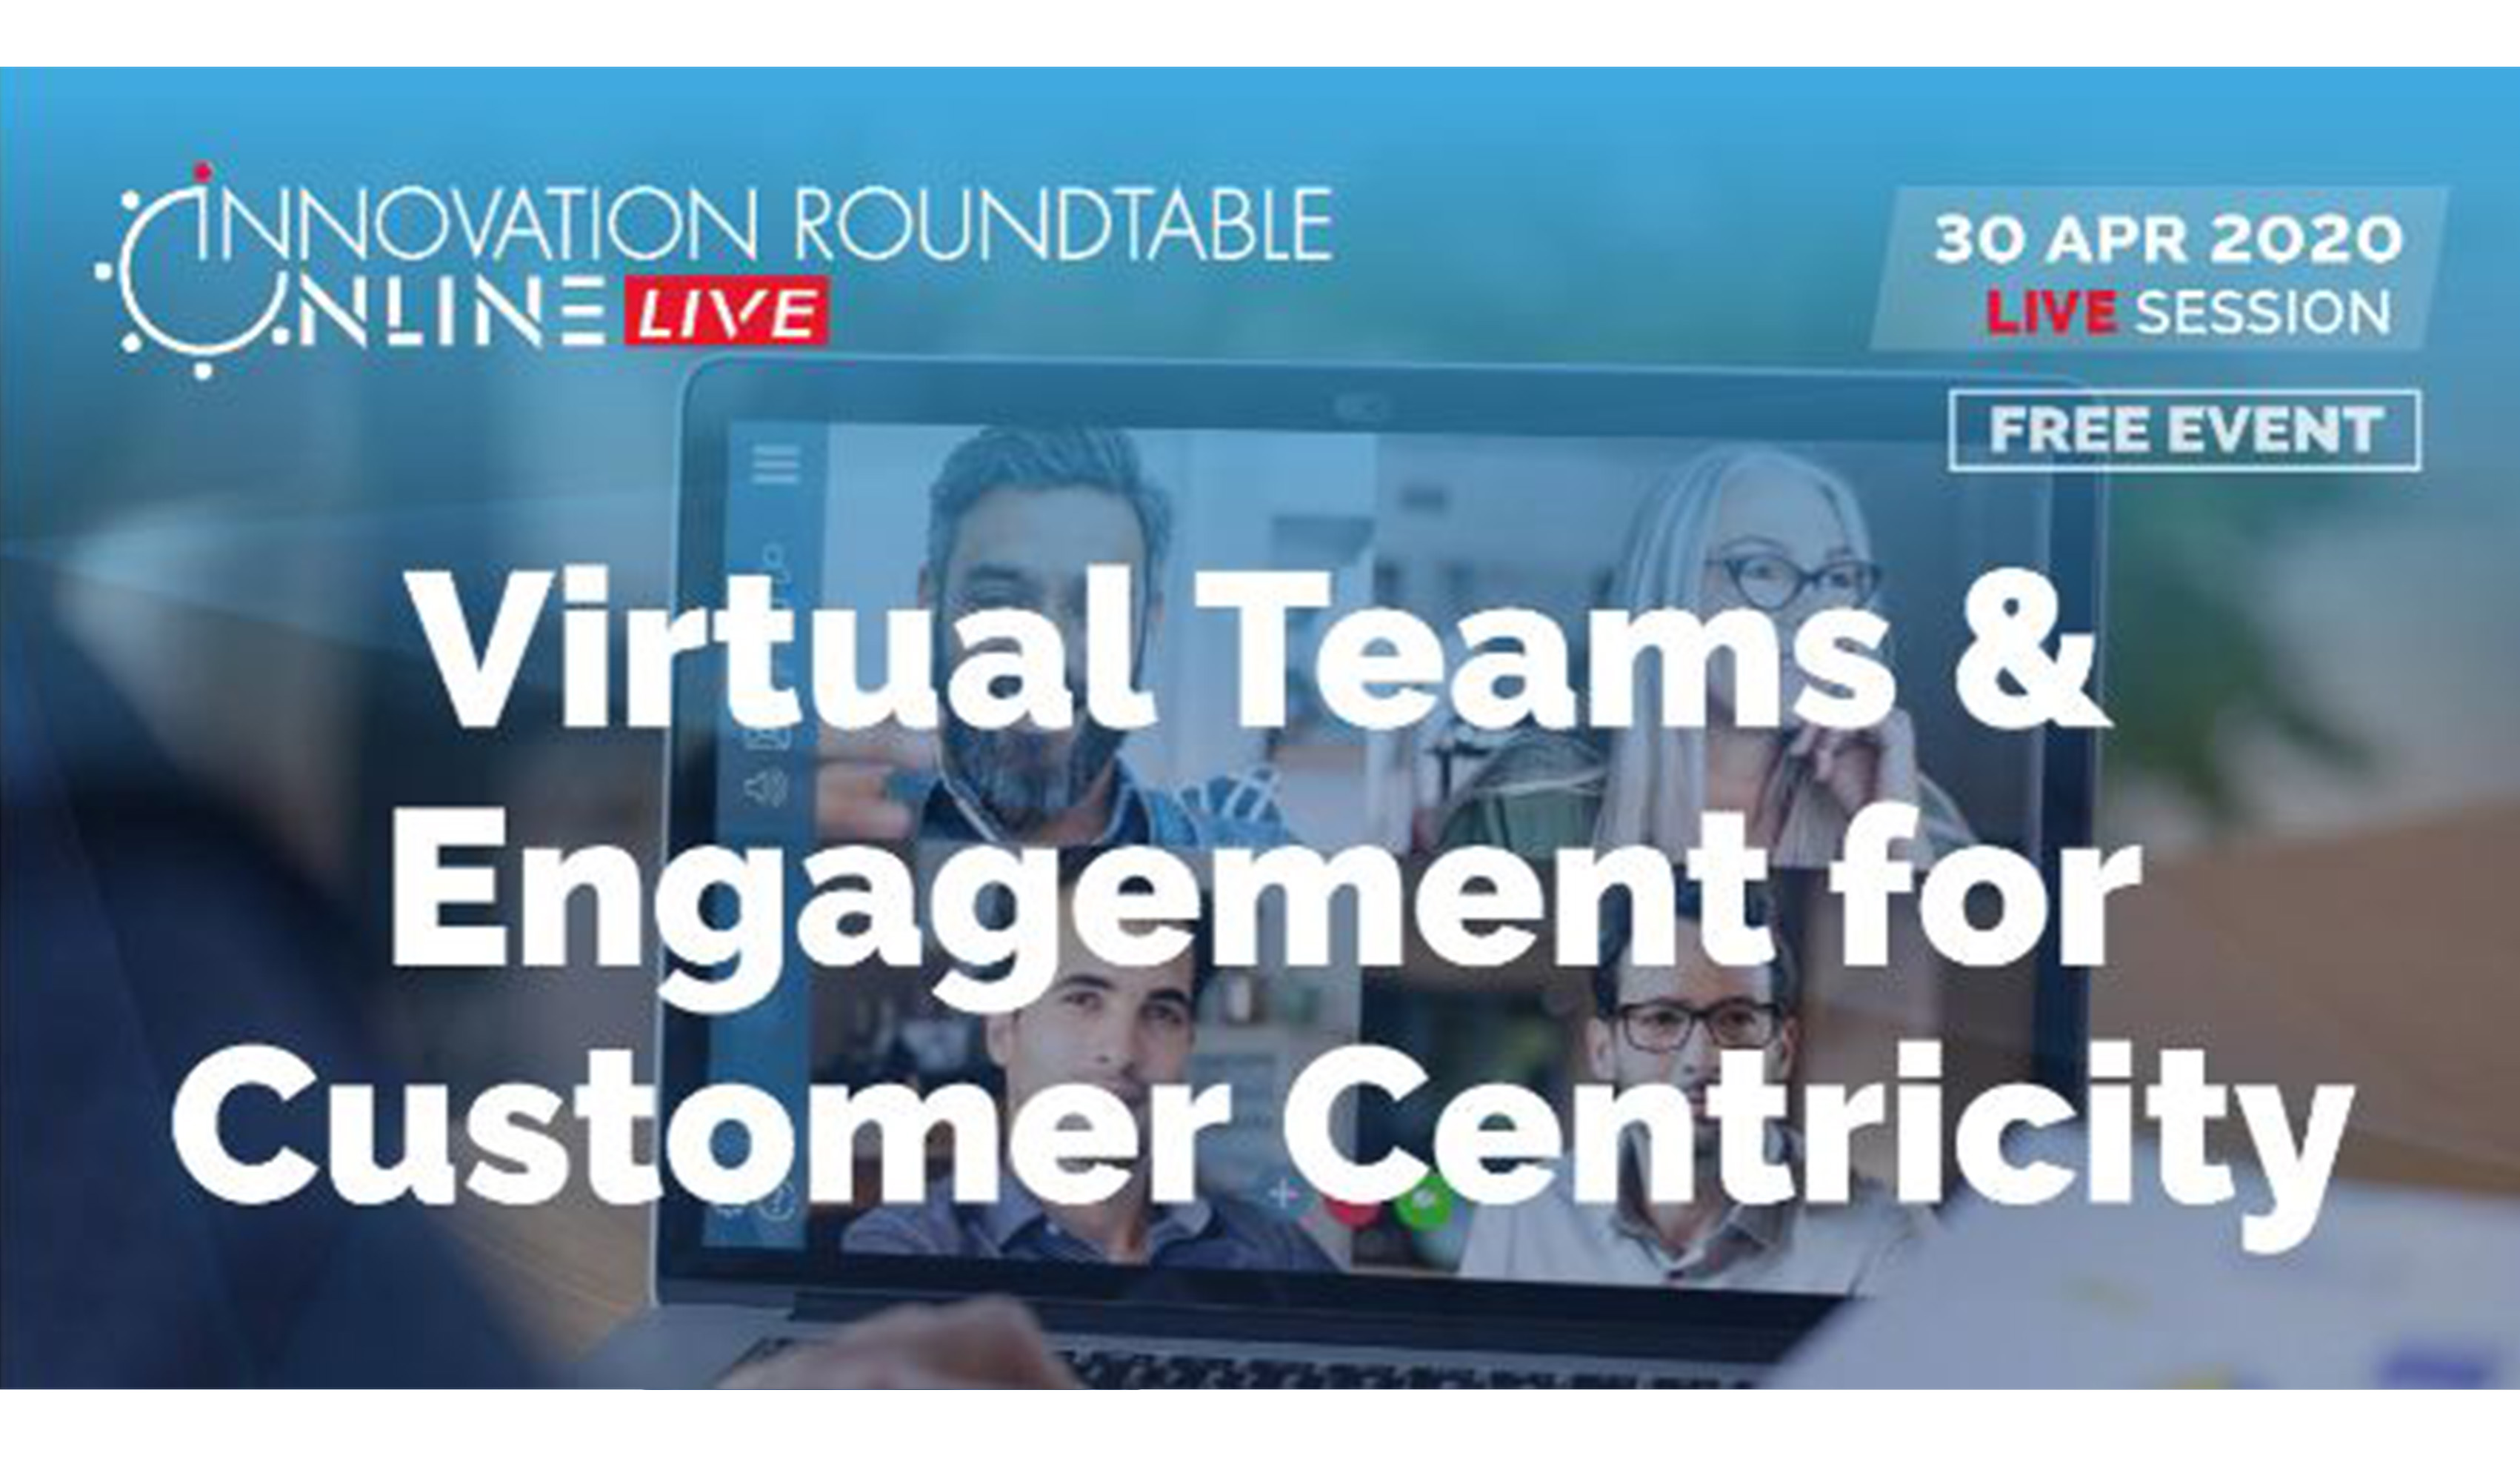 Innovation Roundtable - On line : 'Virtual Teams & Engagement for Customer Centricity'